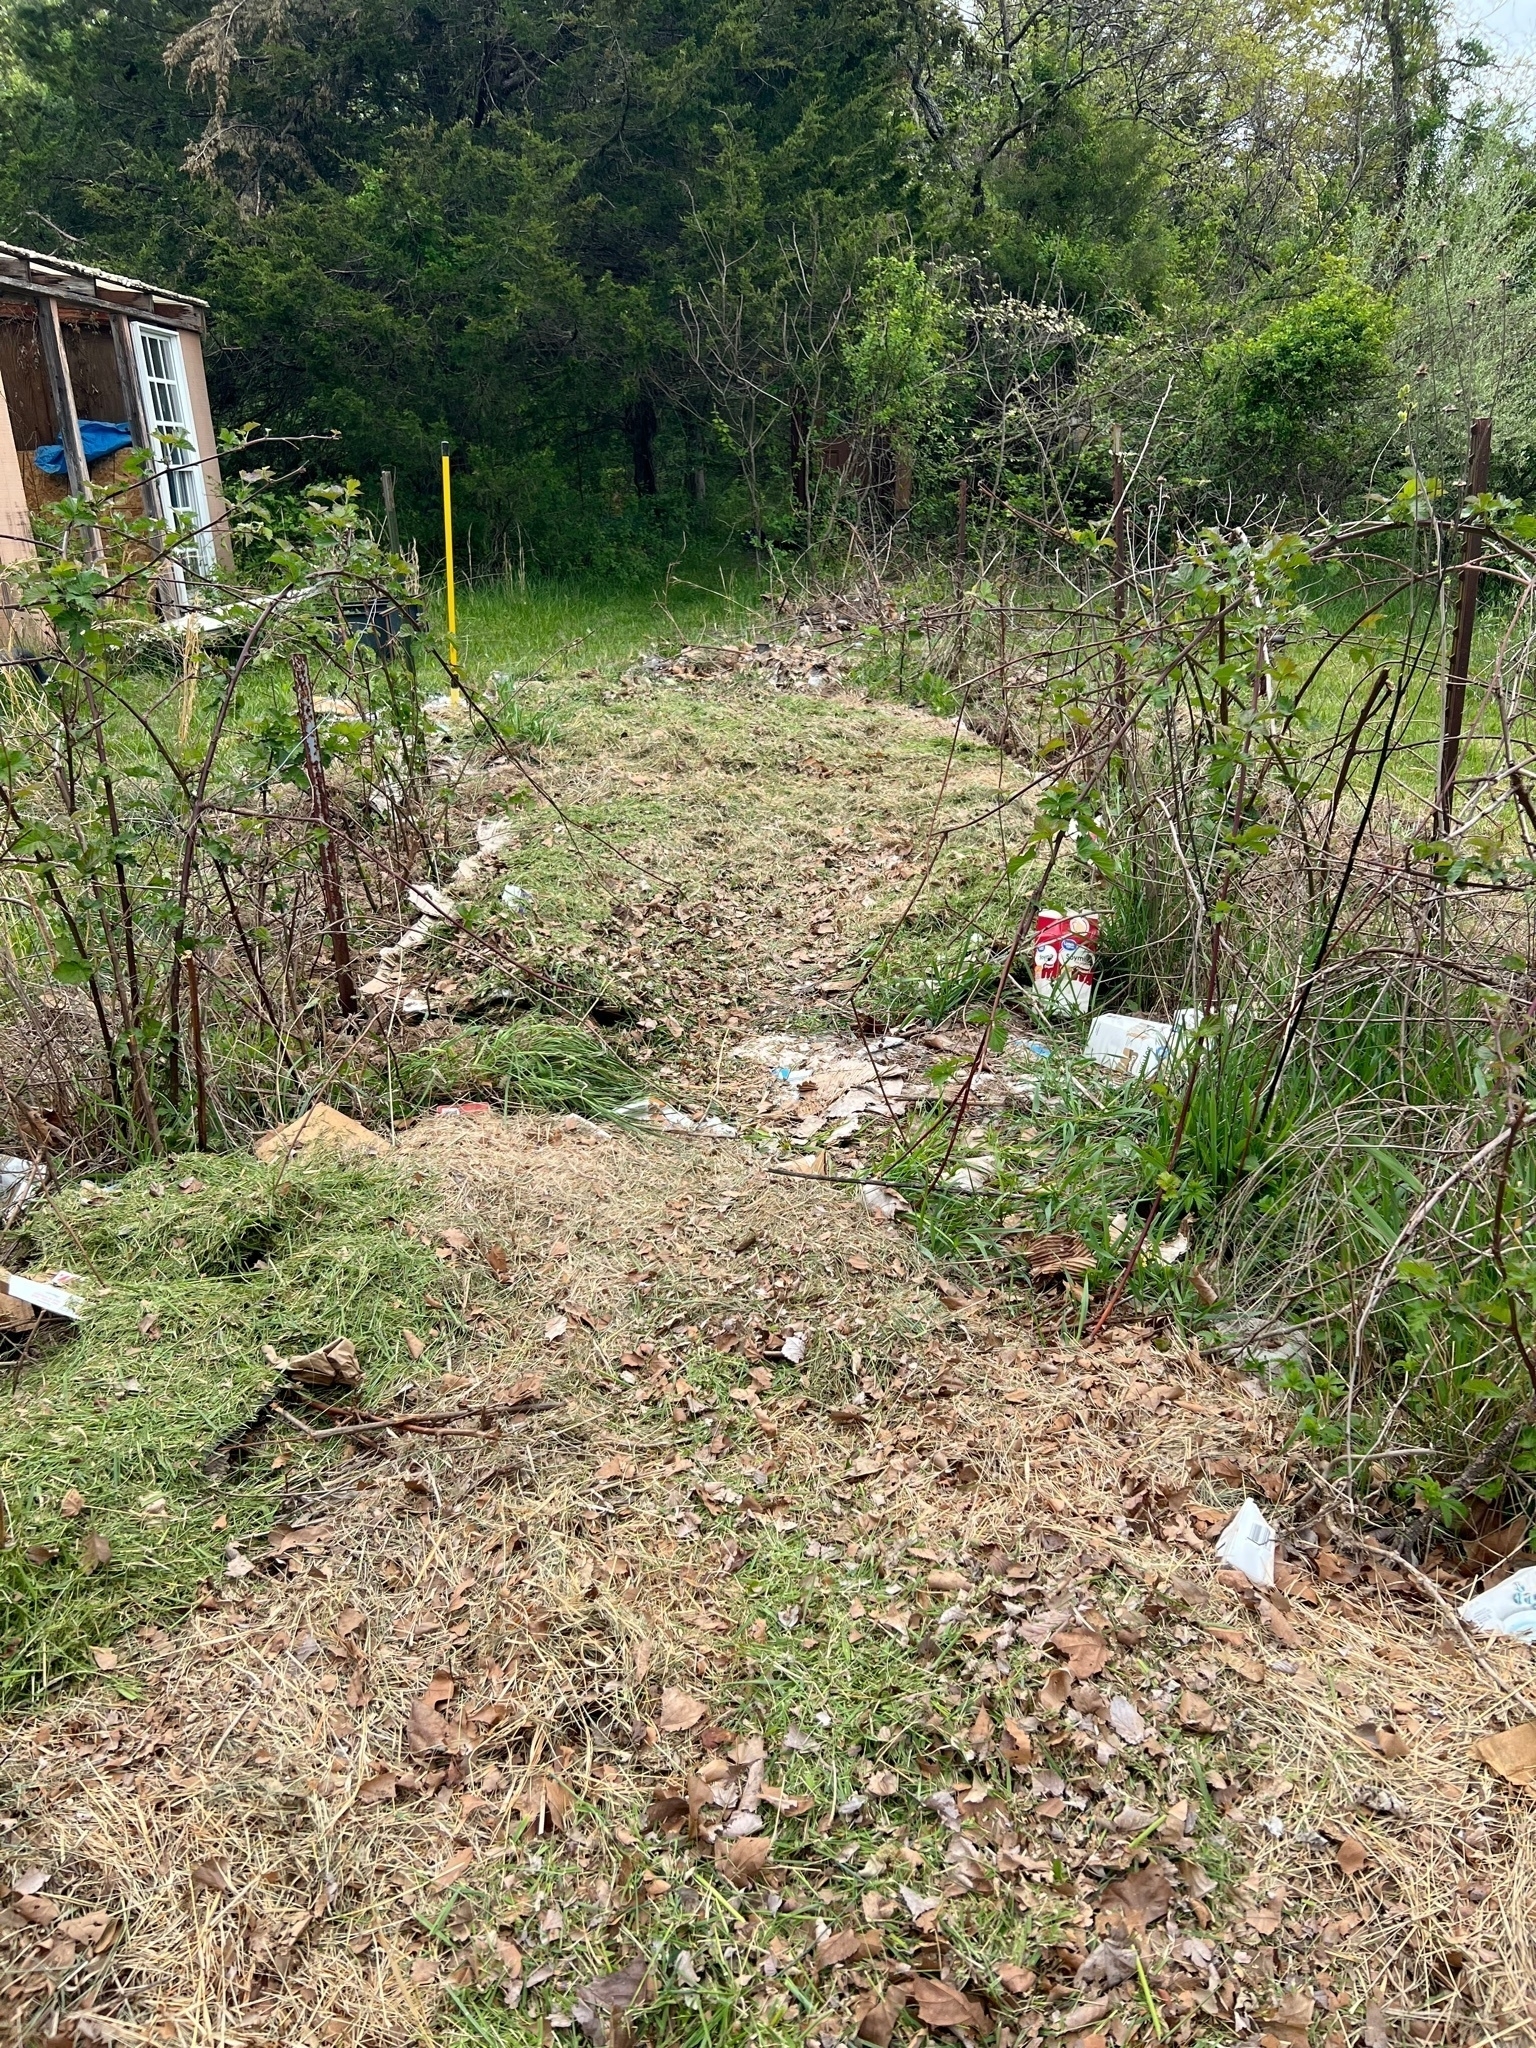 Grass clippings are layered over hidden layers of cardboard between two rows of blackberry plants. In the background are a variety of trees.